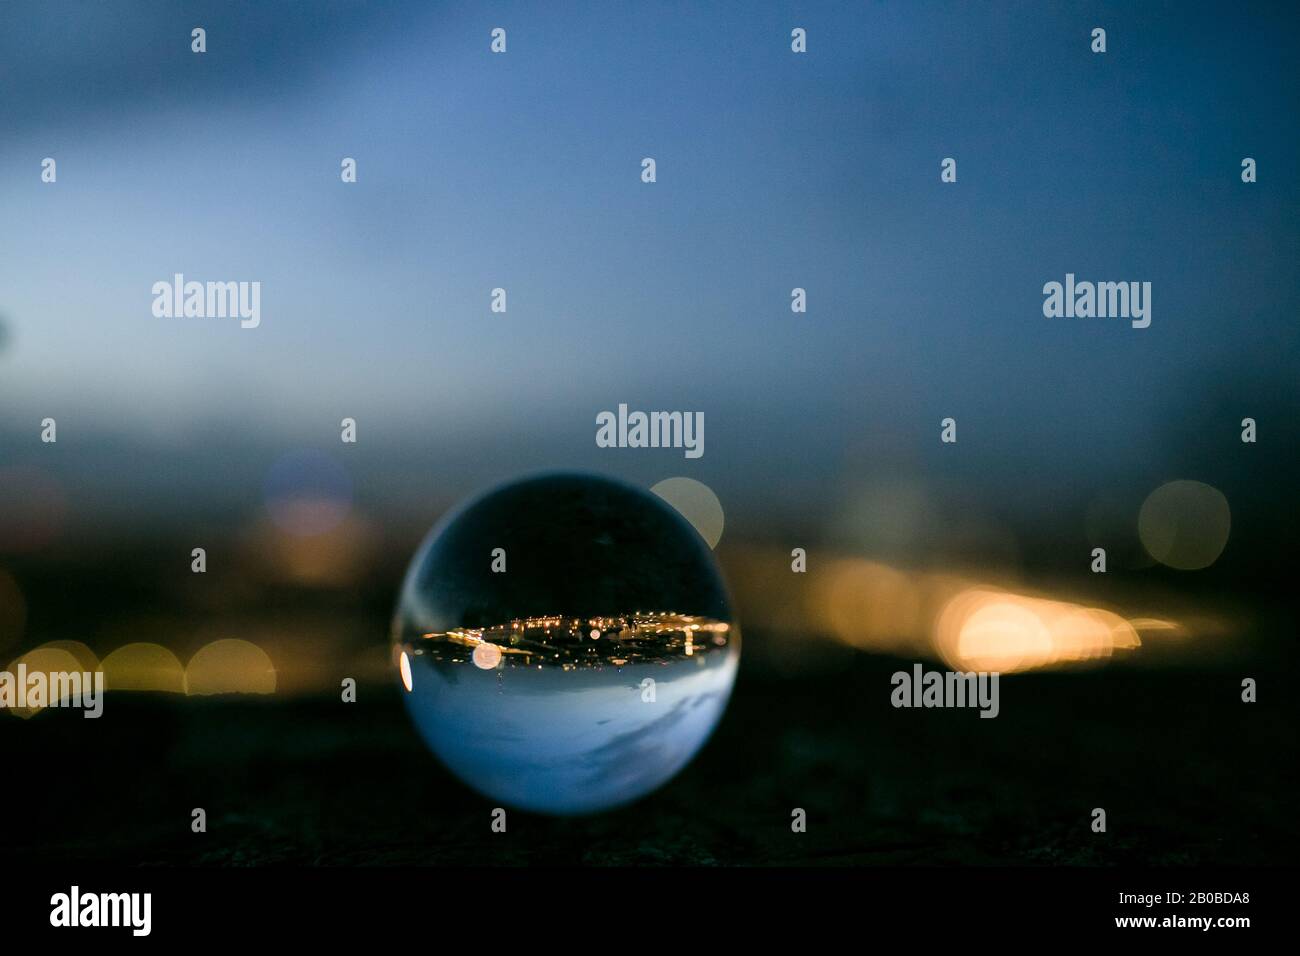 Turin from above, seen through the glass sphere Stock Photo